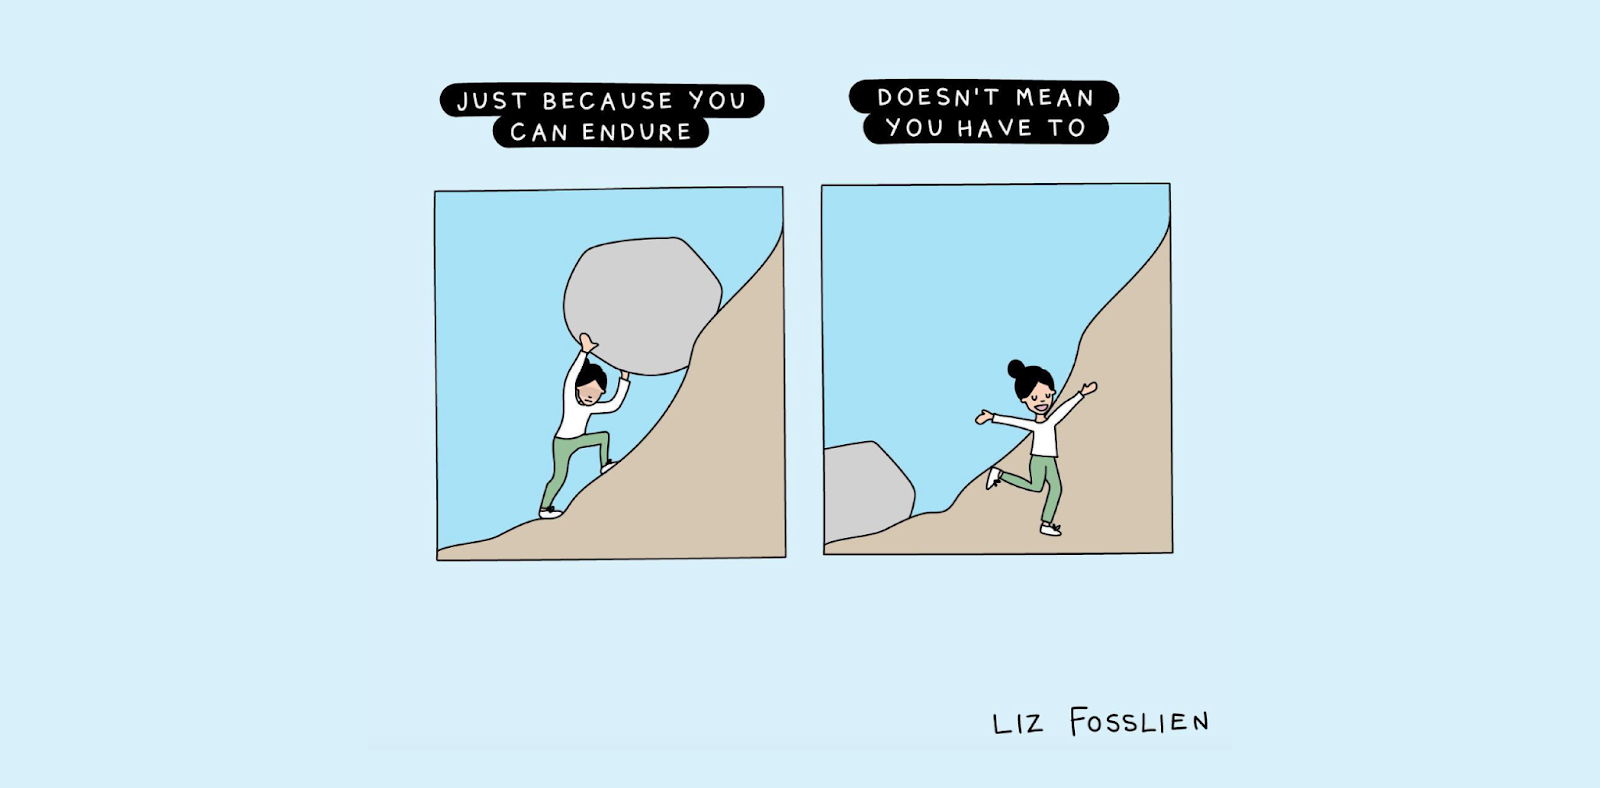 A woman pushing a boulder up a hill with the description “just because you can endure” and another woman walking away from the boulder with the description “doesn’t mean you have to.”